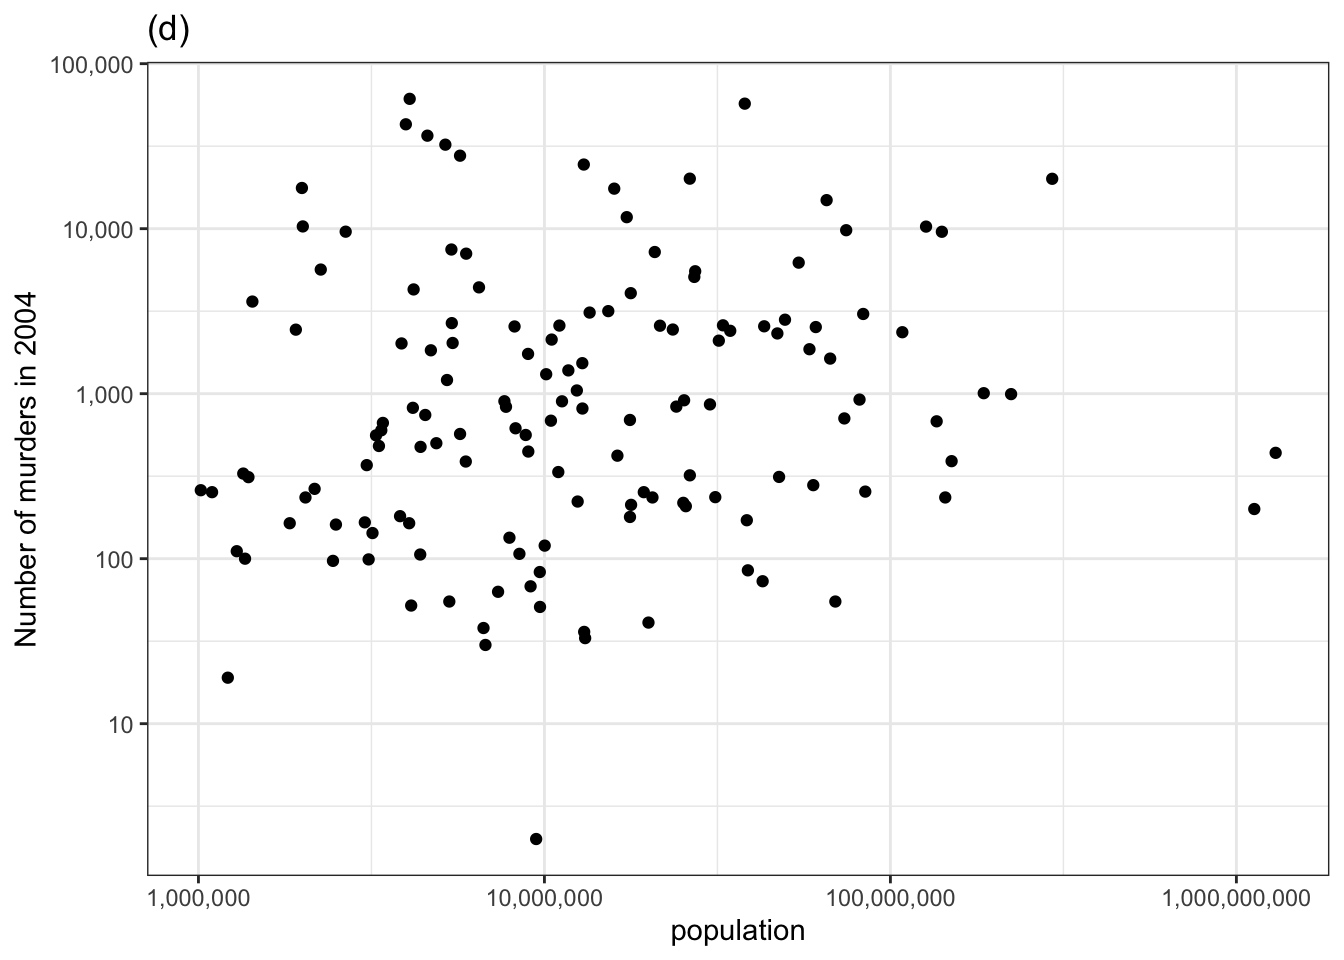 Checking for covariation in the number of murders versus population using the permutation method.